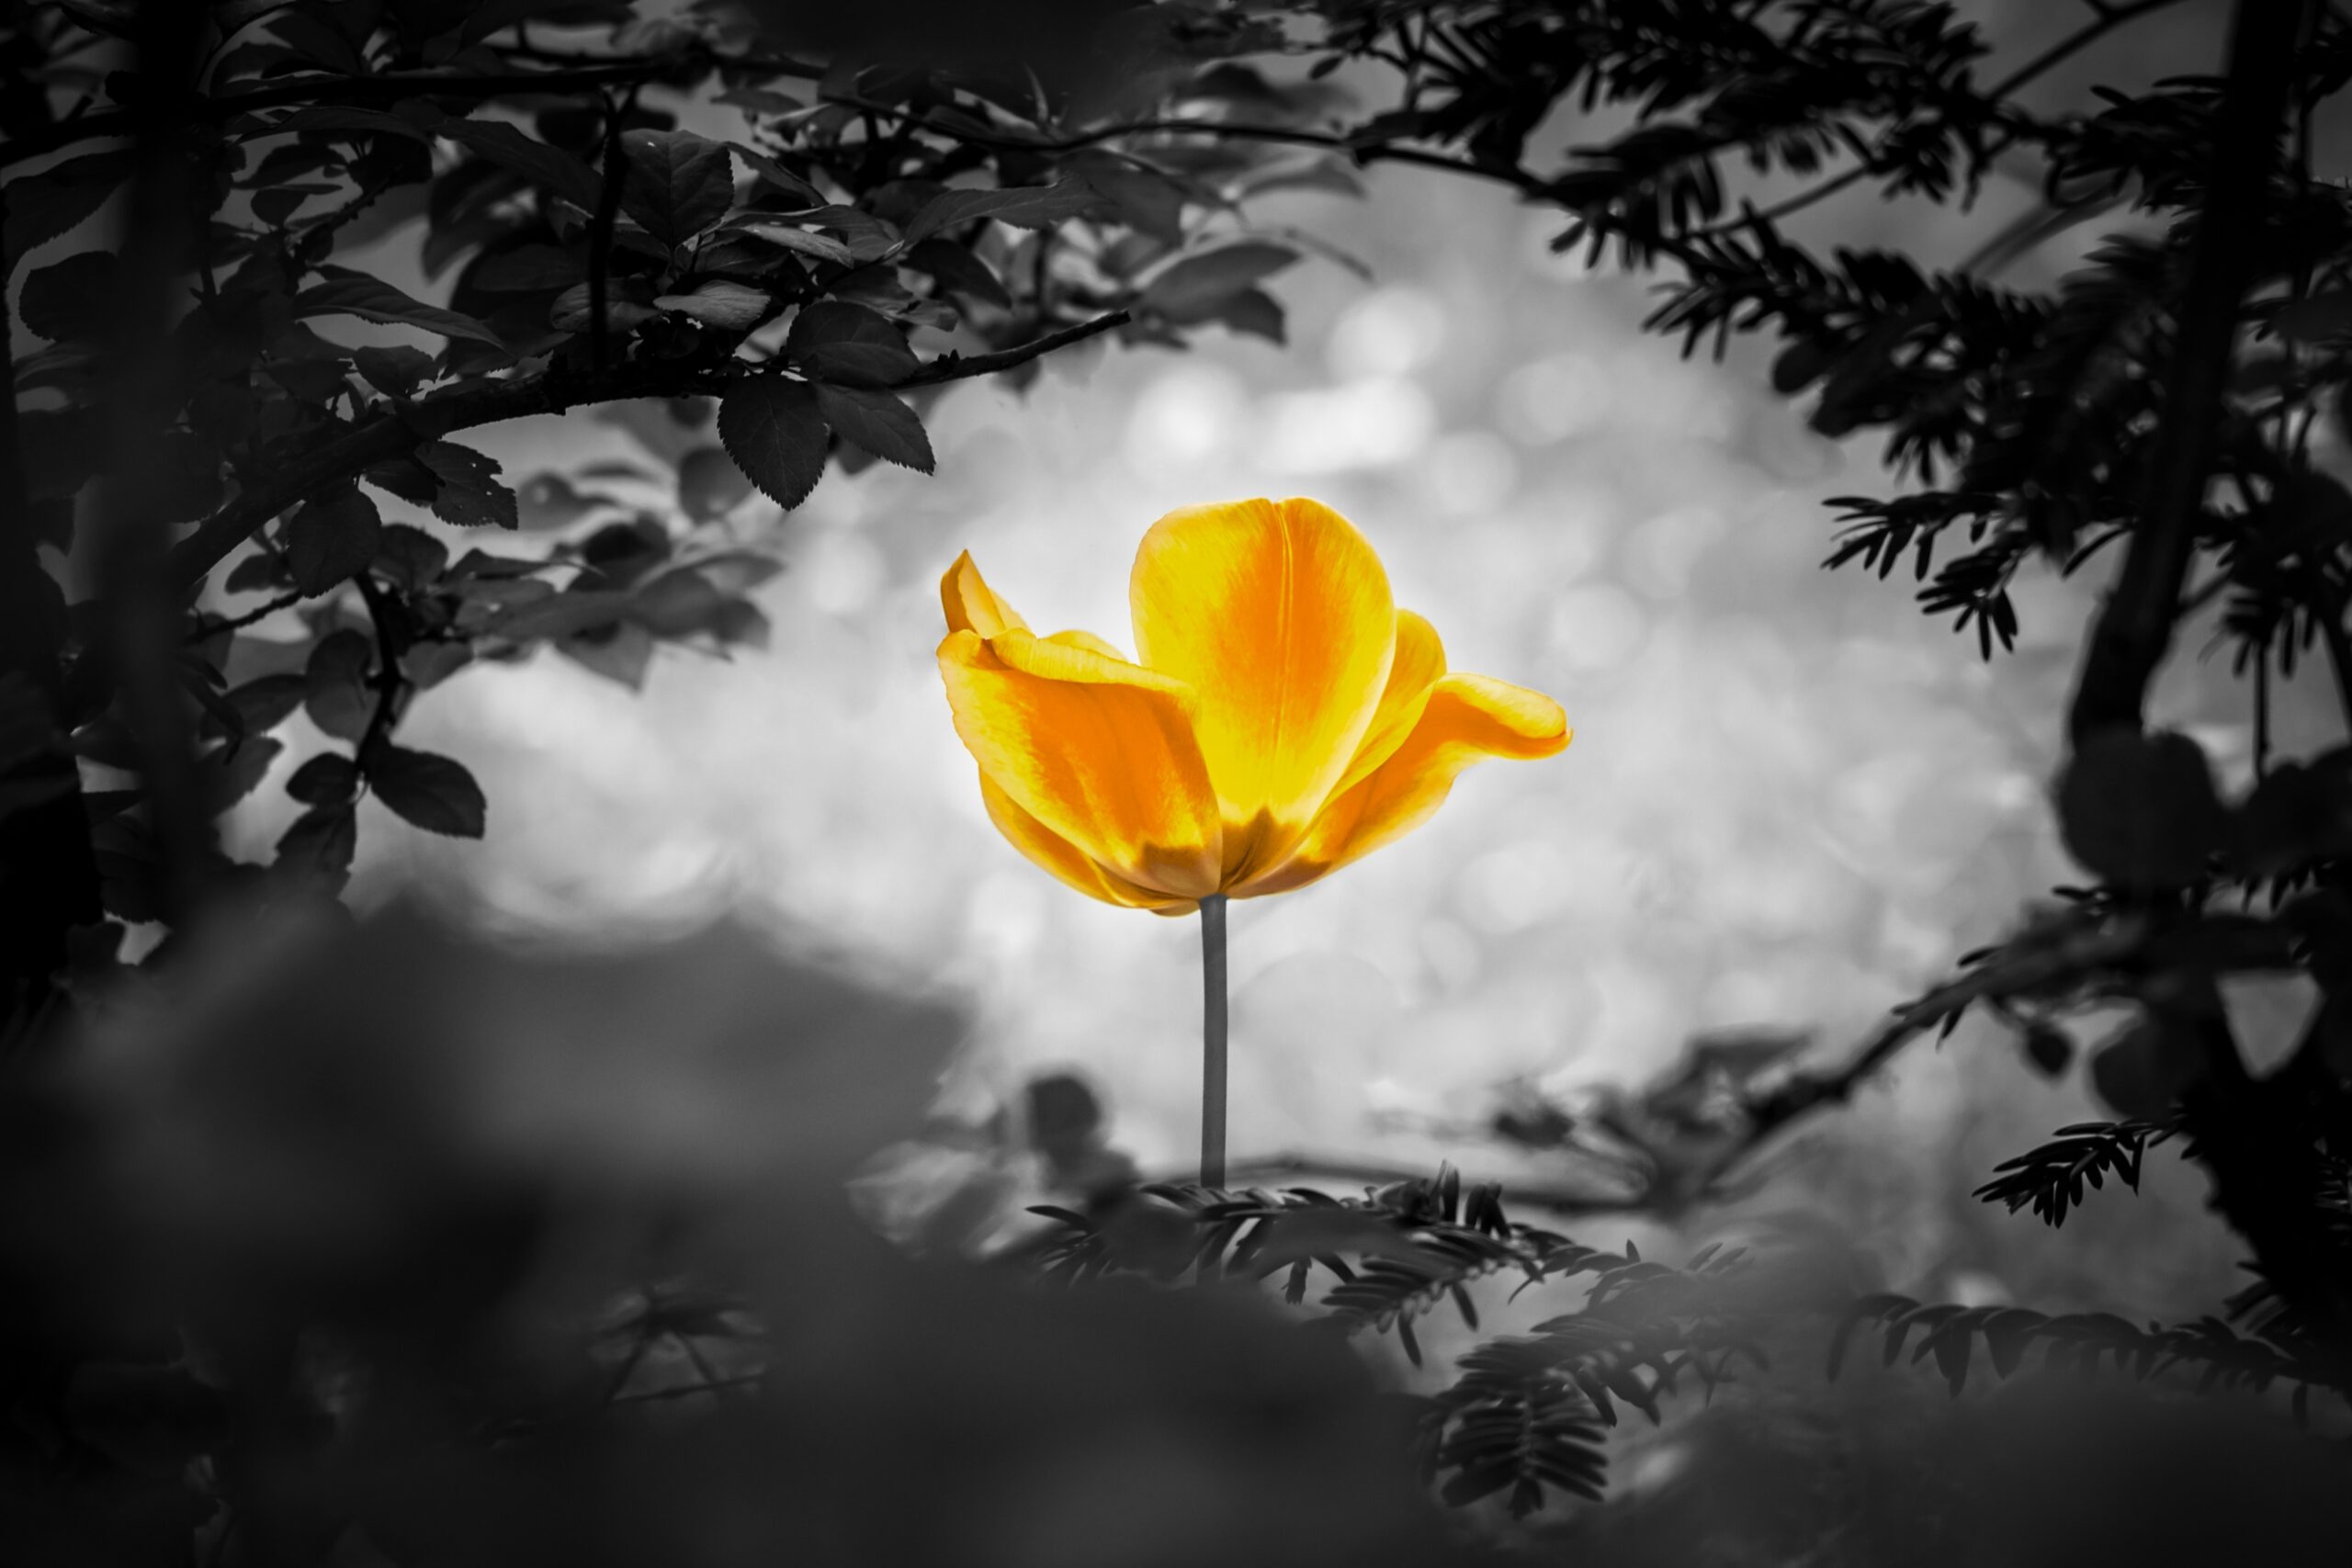 Yellow tulip soul in black white for peace